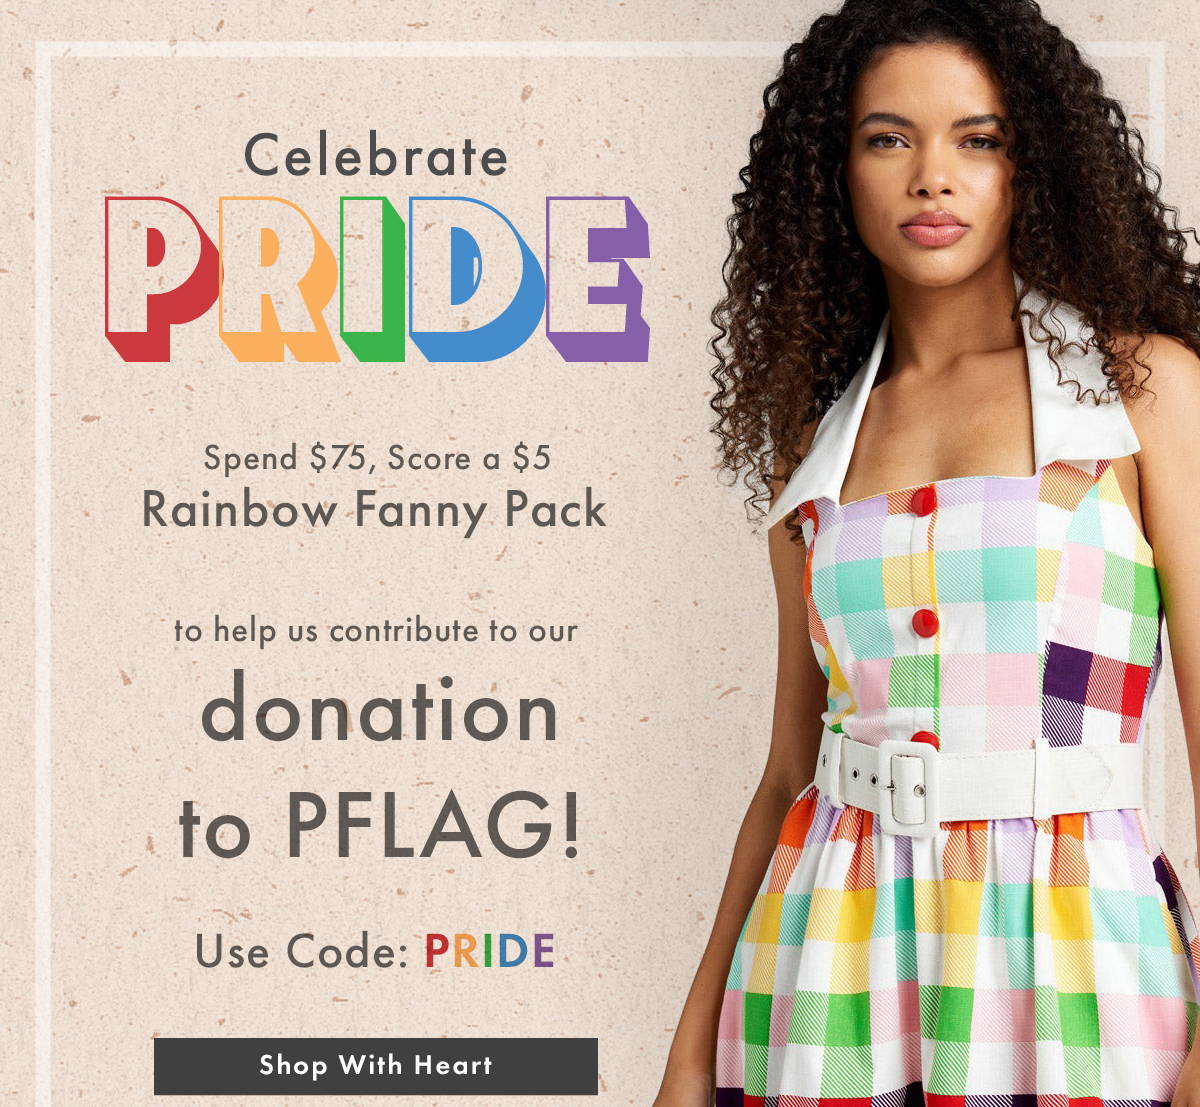 Celebrate Pride: Spend $75, Score a $5 Rainbow Fanny Pack to help us contribute to our donation to PFLAG! Use Code: PRIDE | SHOP WITH HEART 